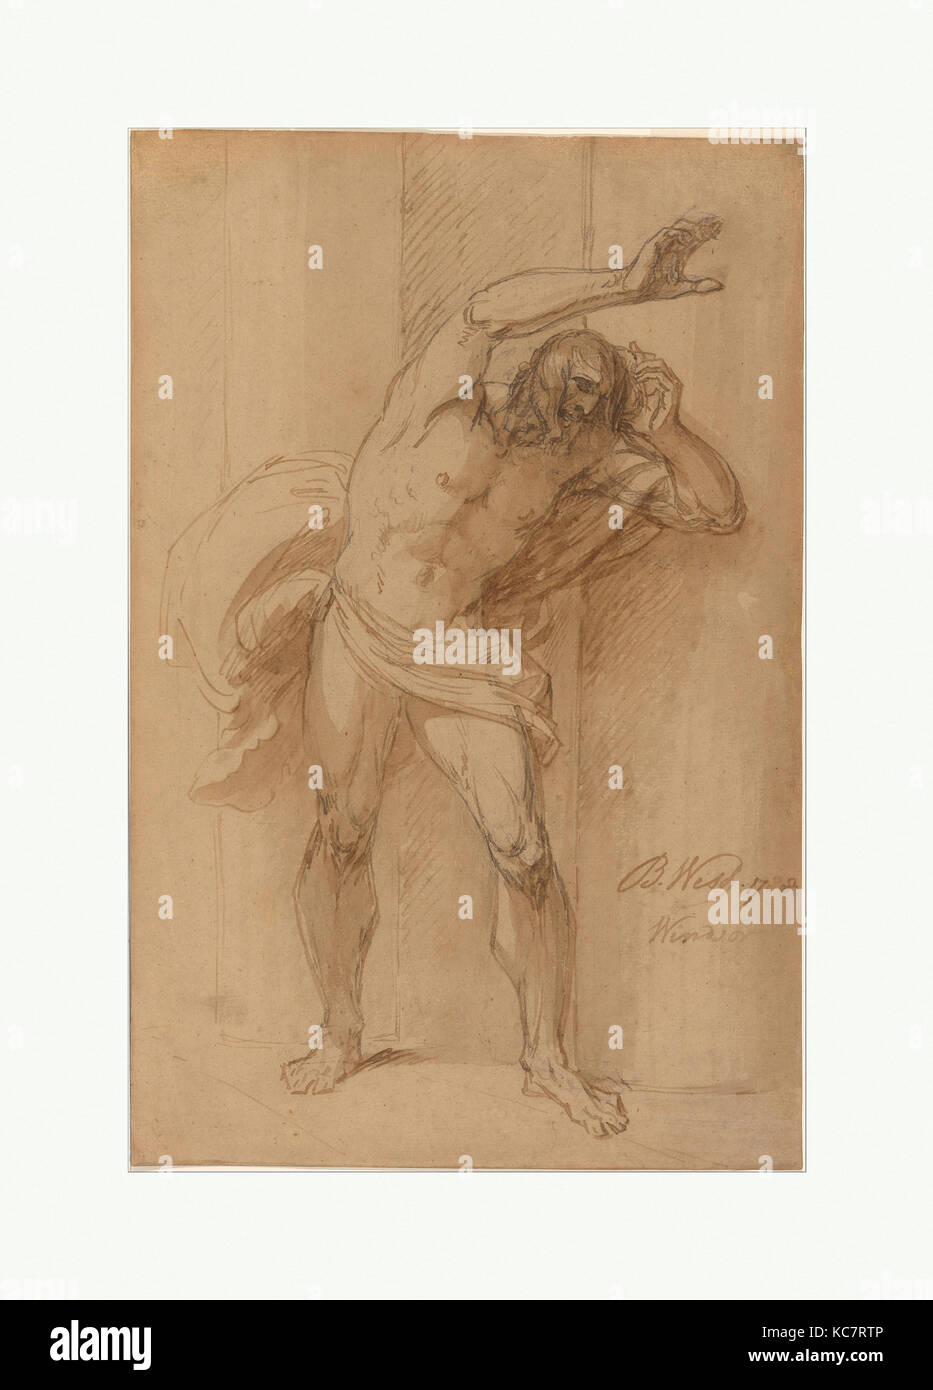 Study for the Crucifixion, 1788, Brown ink applied by brush and pen, black chalk underdrawing; laid paper prepared with a light Stock Photo